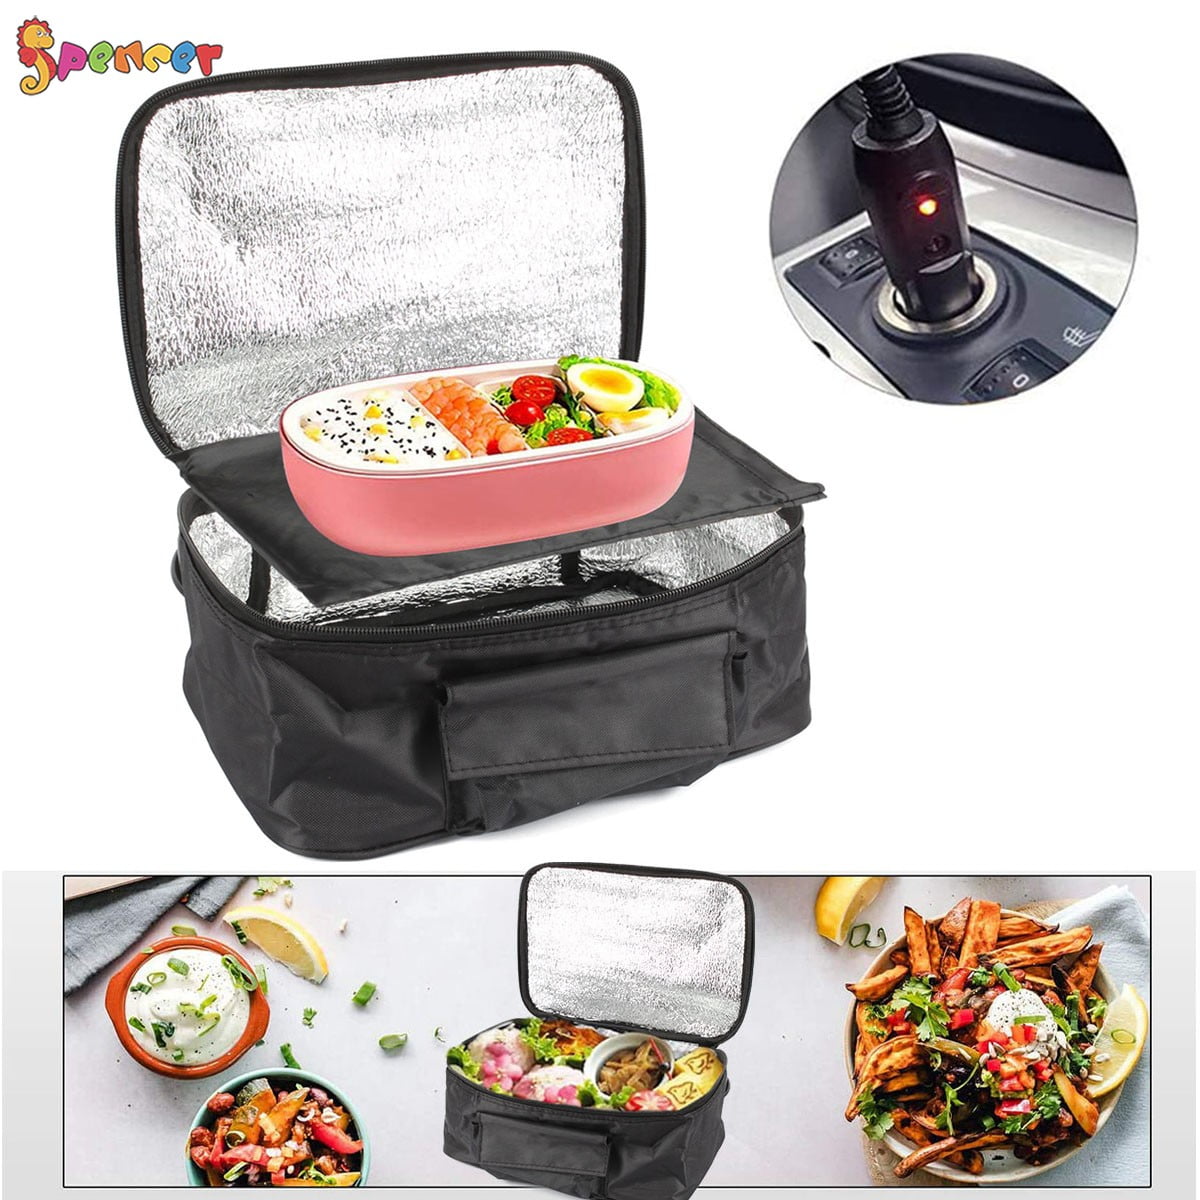 Portable Food Warmers Electric Heater Lunch Box Mini Oven Microwave Car Office 